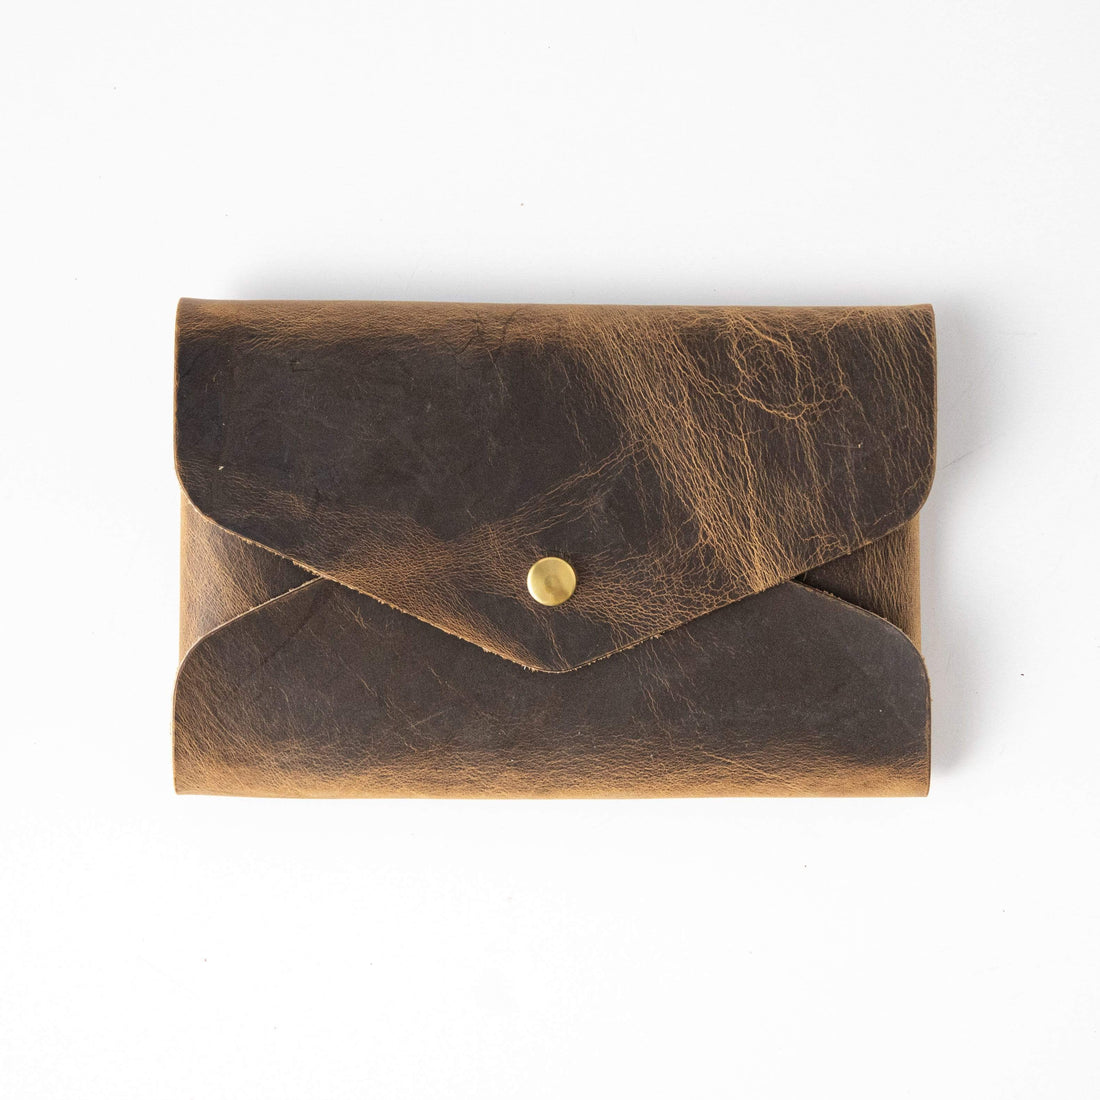 Gale and Hayes The Envelope Clutch